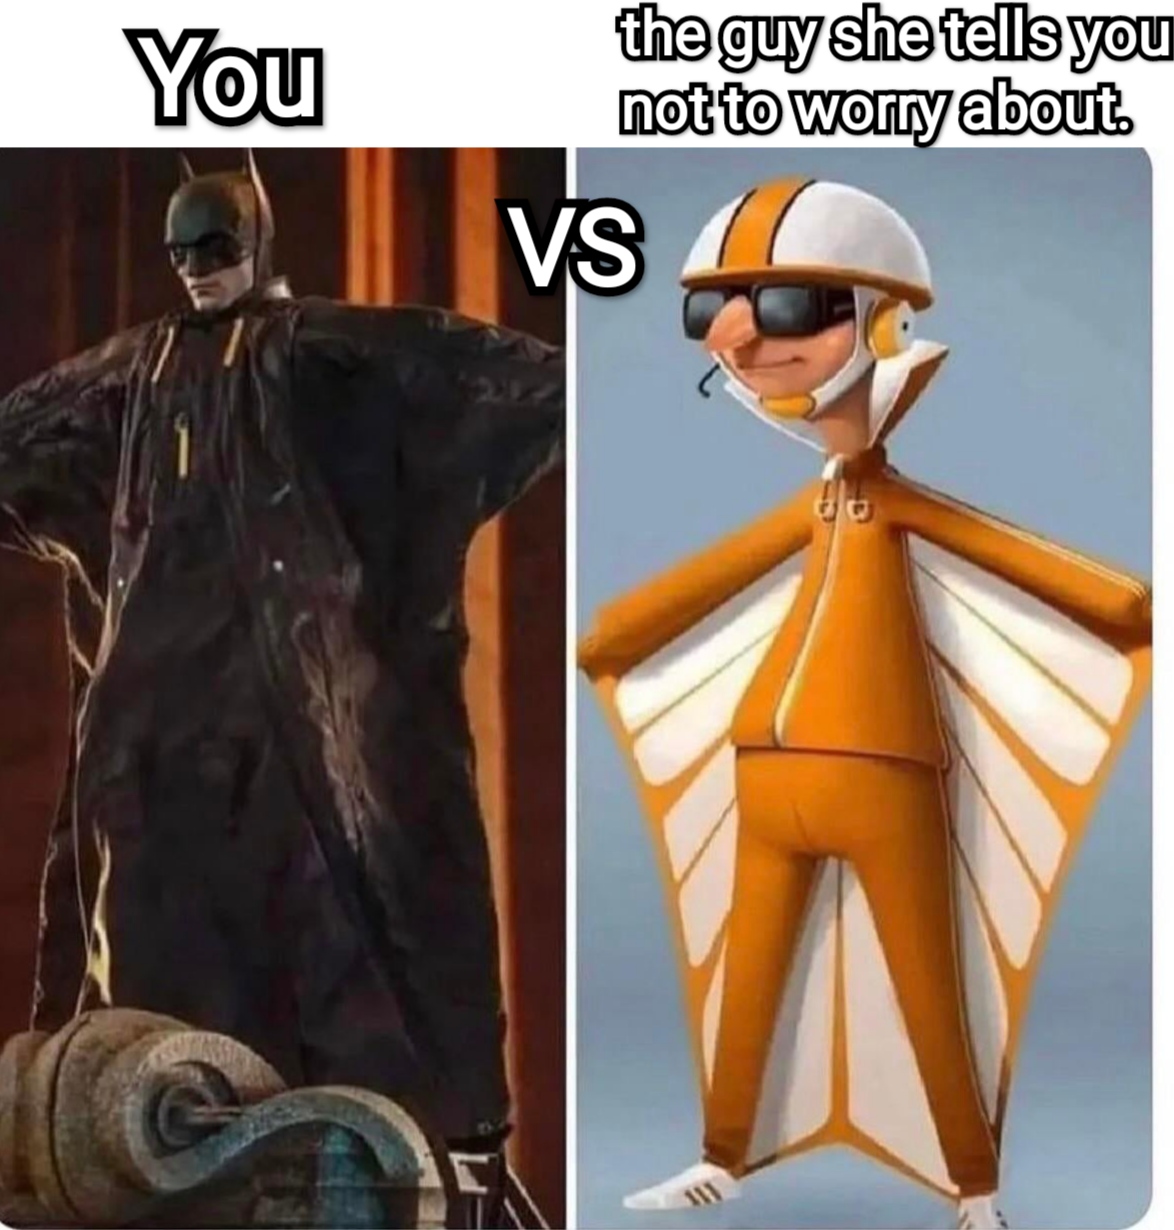 funny memes - dank memes - vectores meme - You . the guy she tells you not to worry about Vs